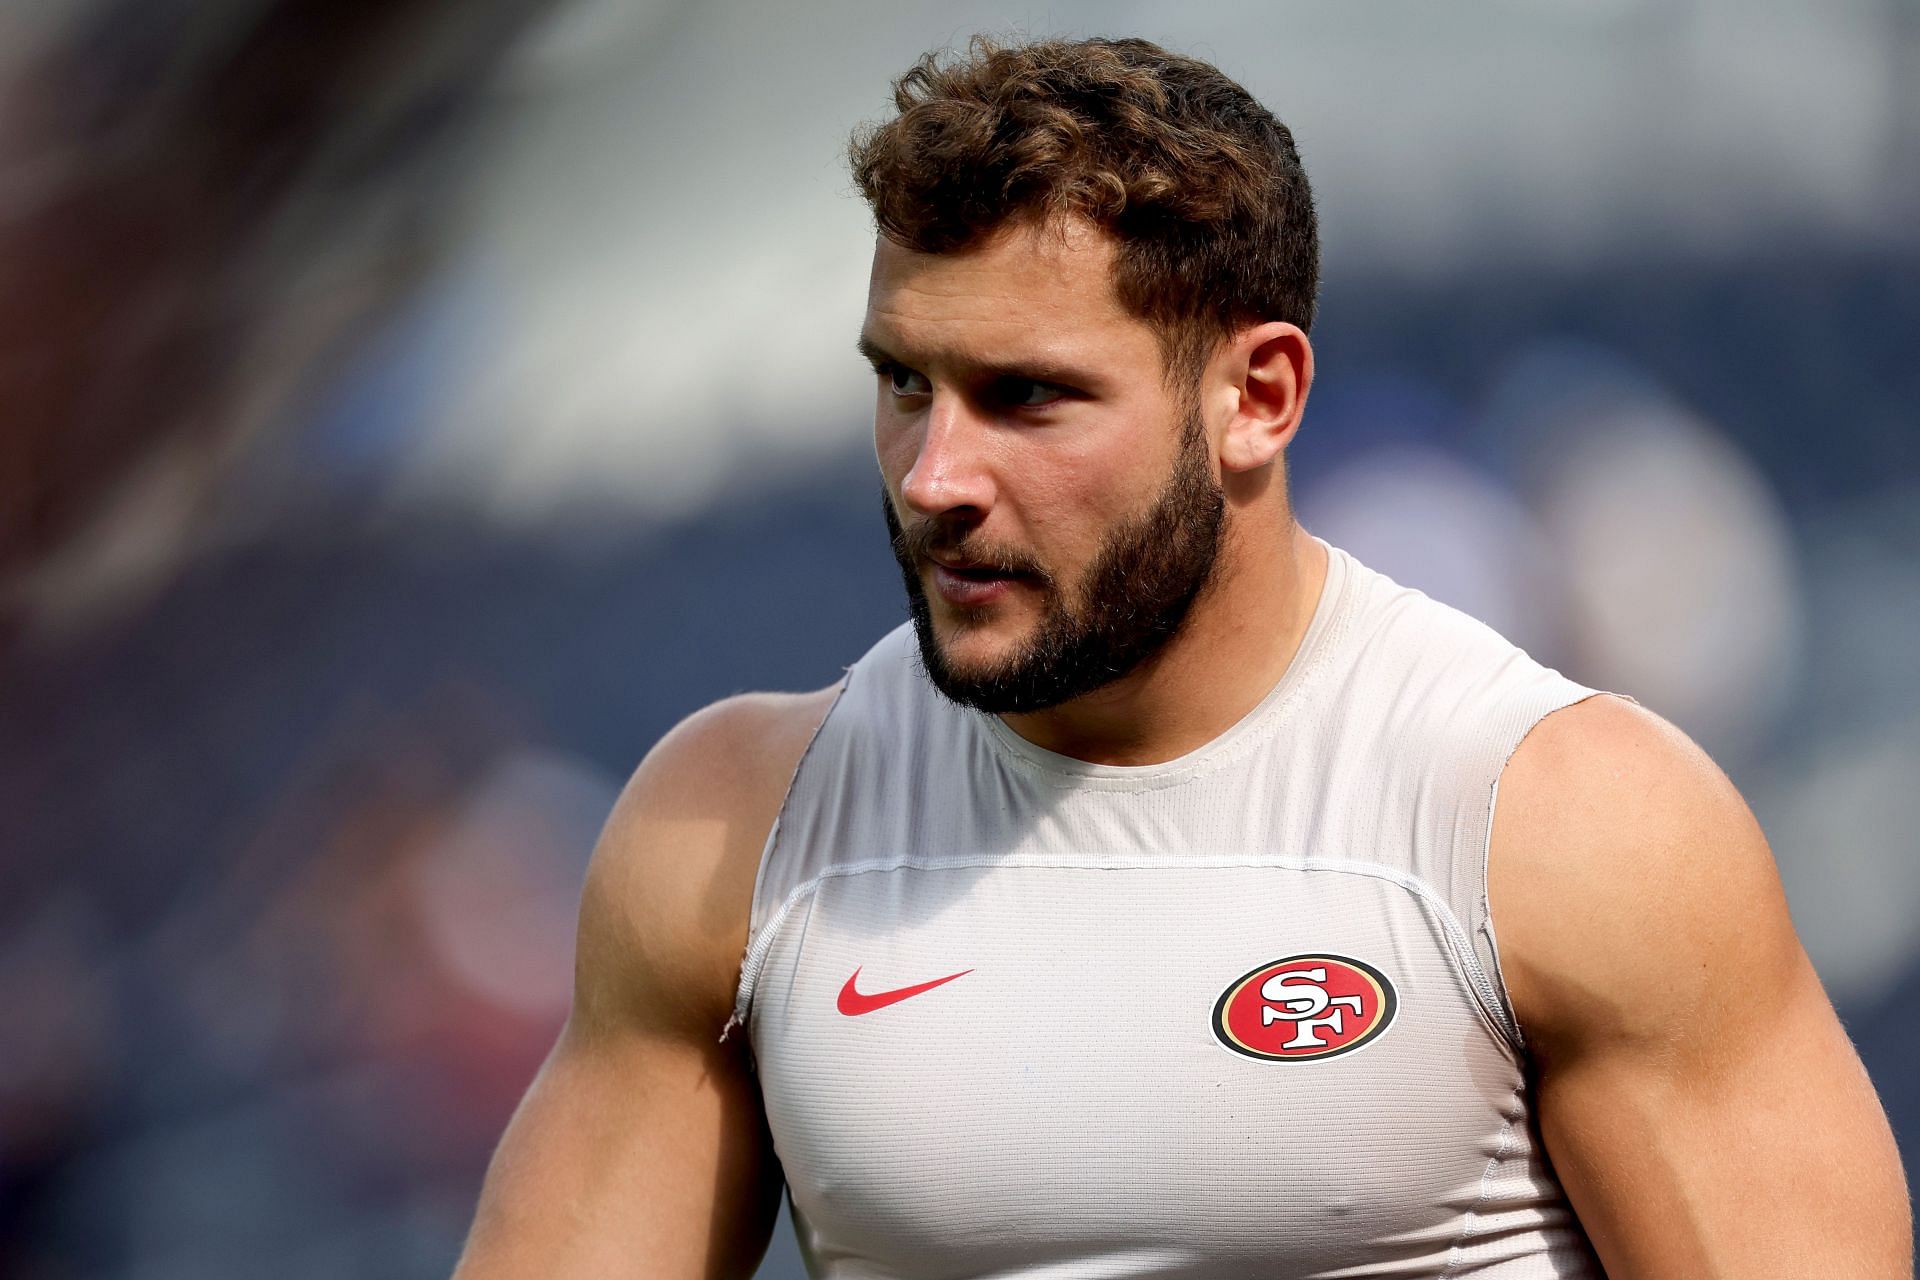 49ers star Nick Bosa gets clowned by NFL Twitter with Donald Trump’s